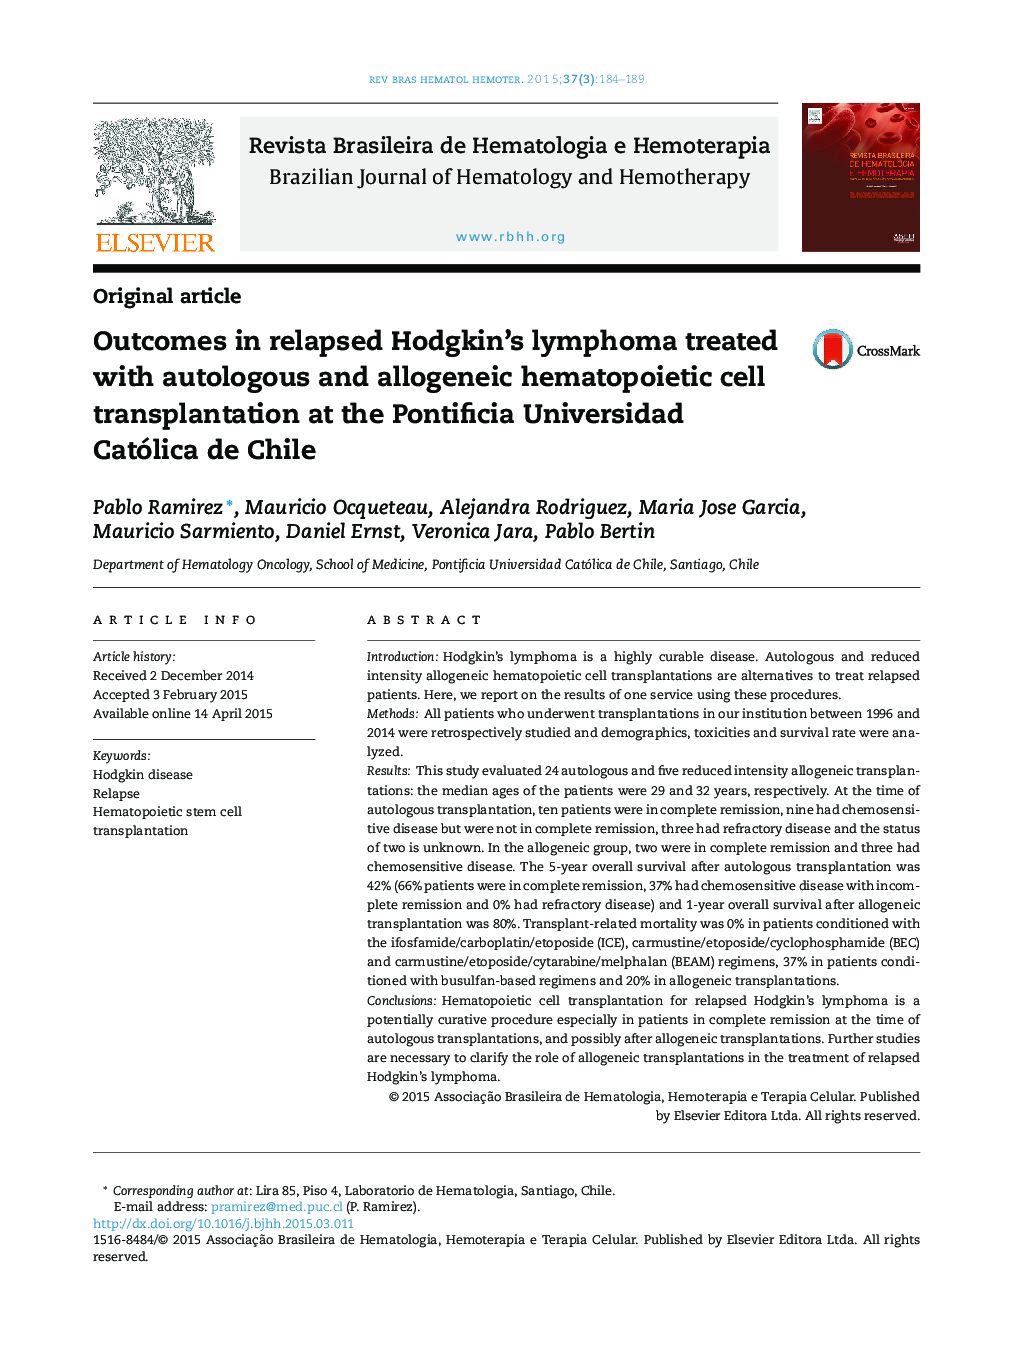 Outcomes in relapsed Hodgkin's lymphoma treated with autologous and allogeneic hematopoietic cell transplantation at the Pontificia Universidad Católica de Chile